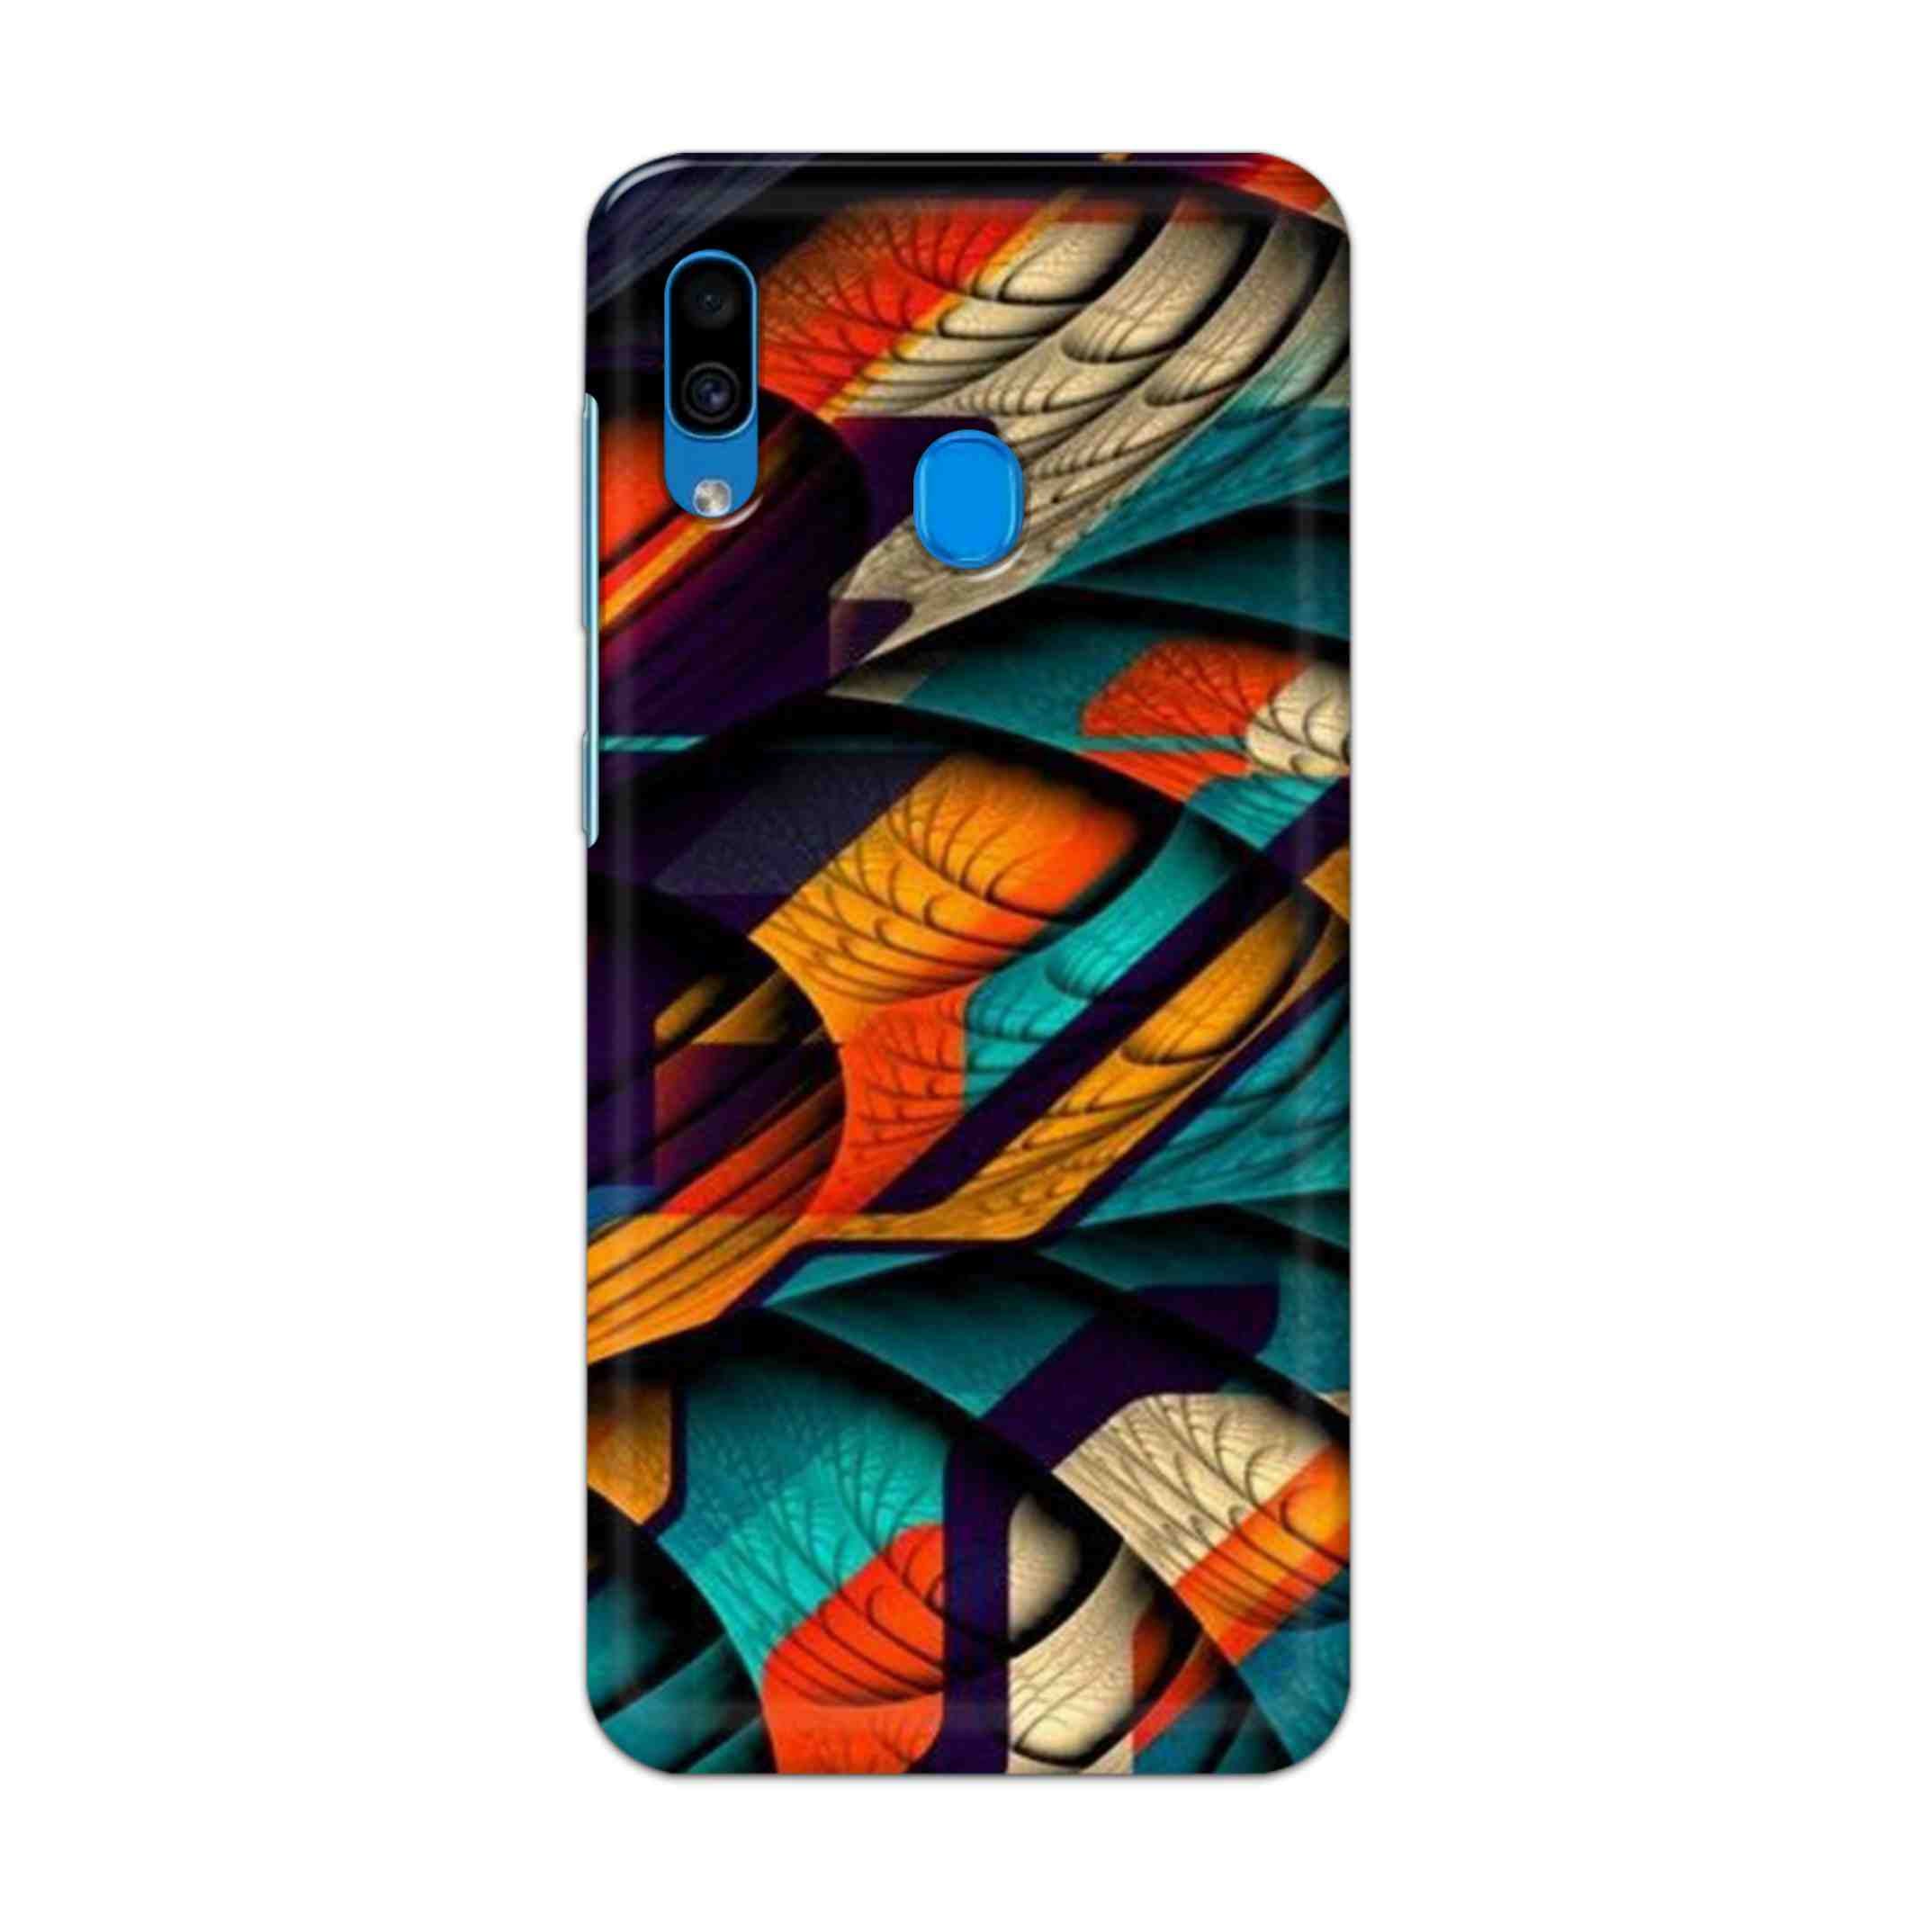 Buy Colour Abstract Hard Back Mobile Phone Case Cover For Samsung Galaxy A30 Online